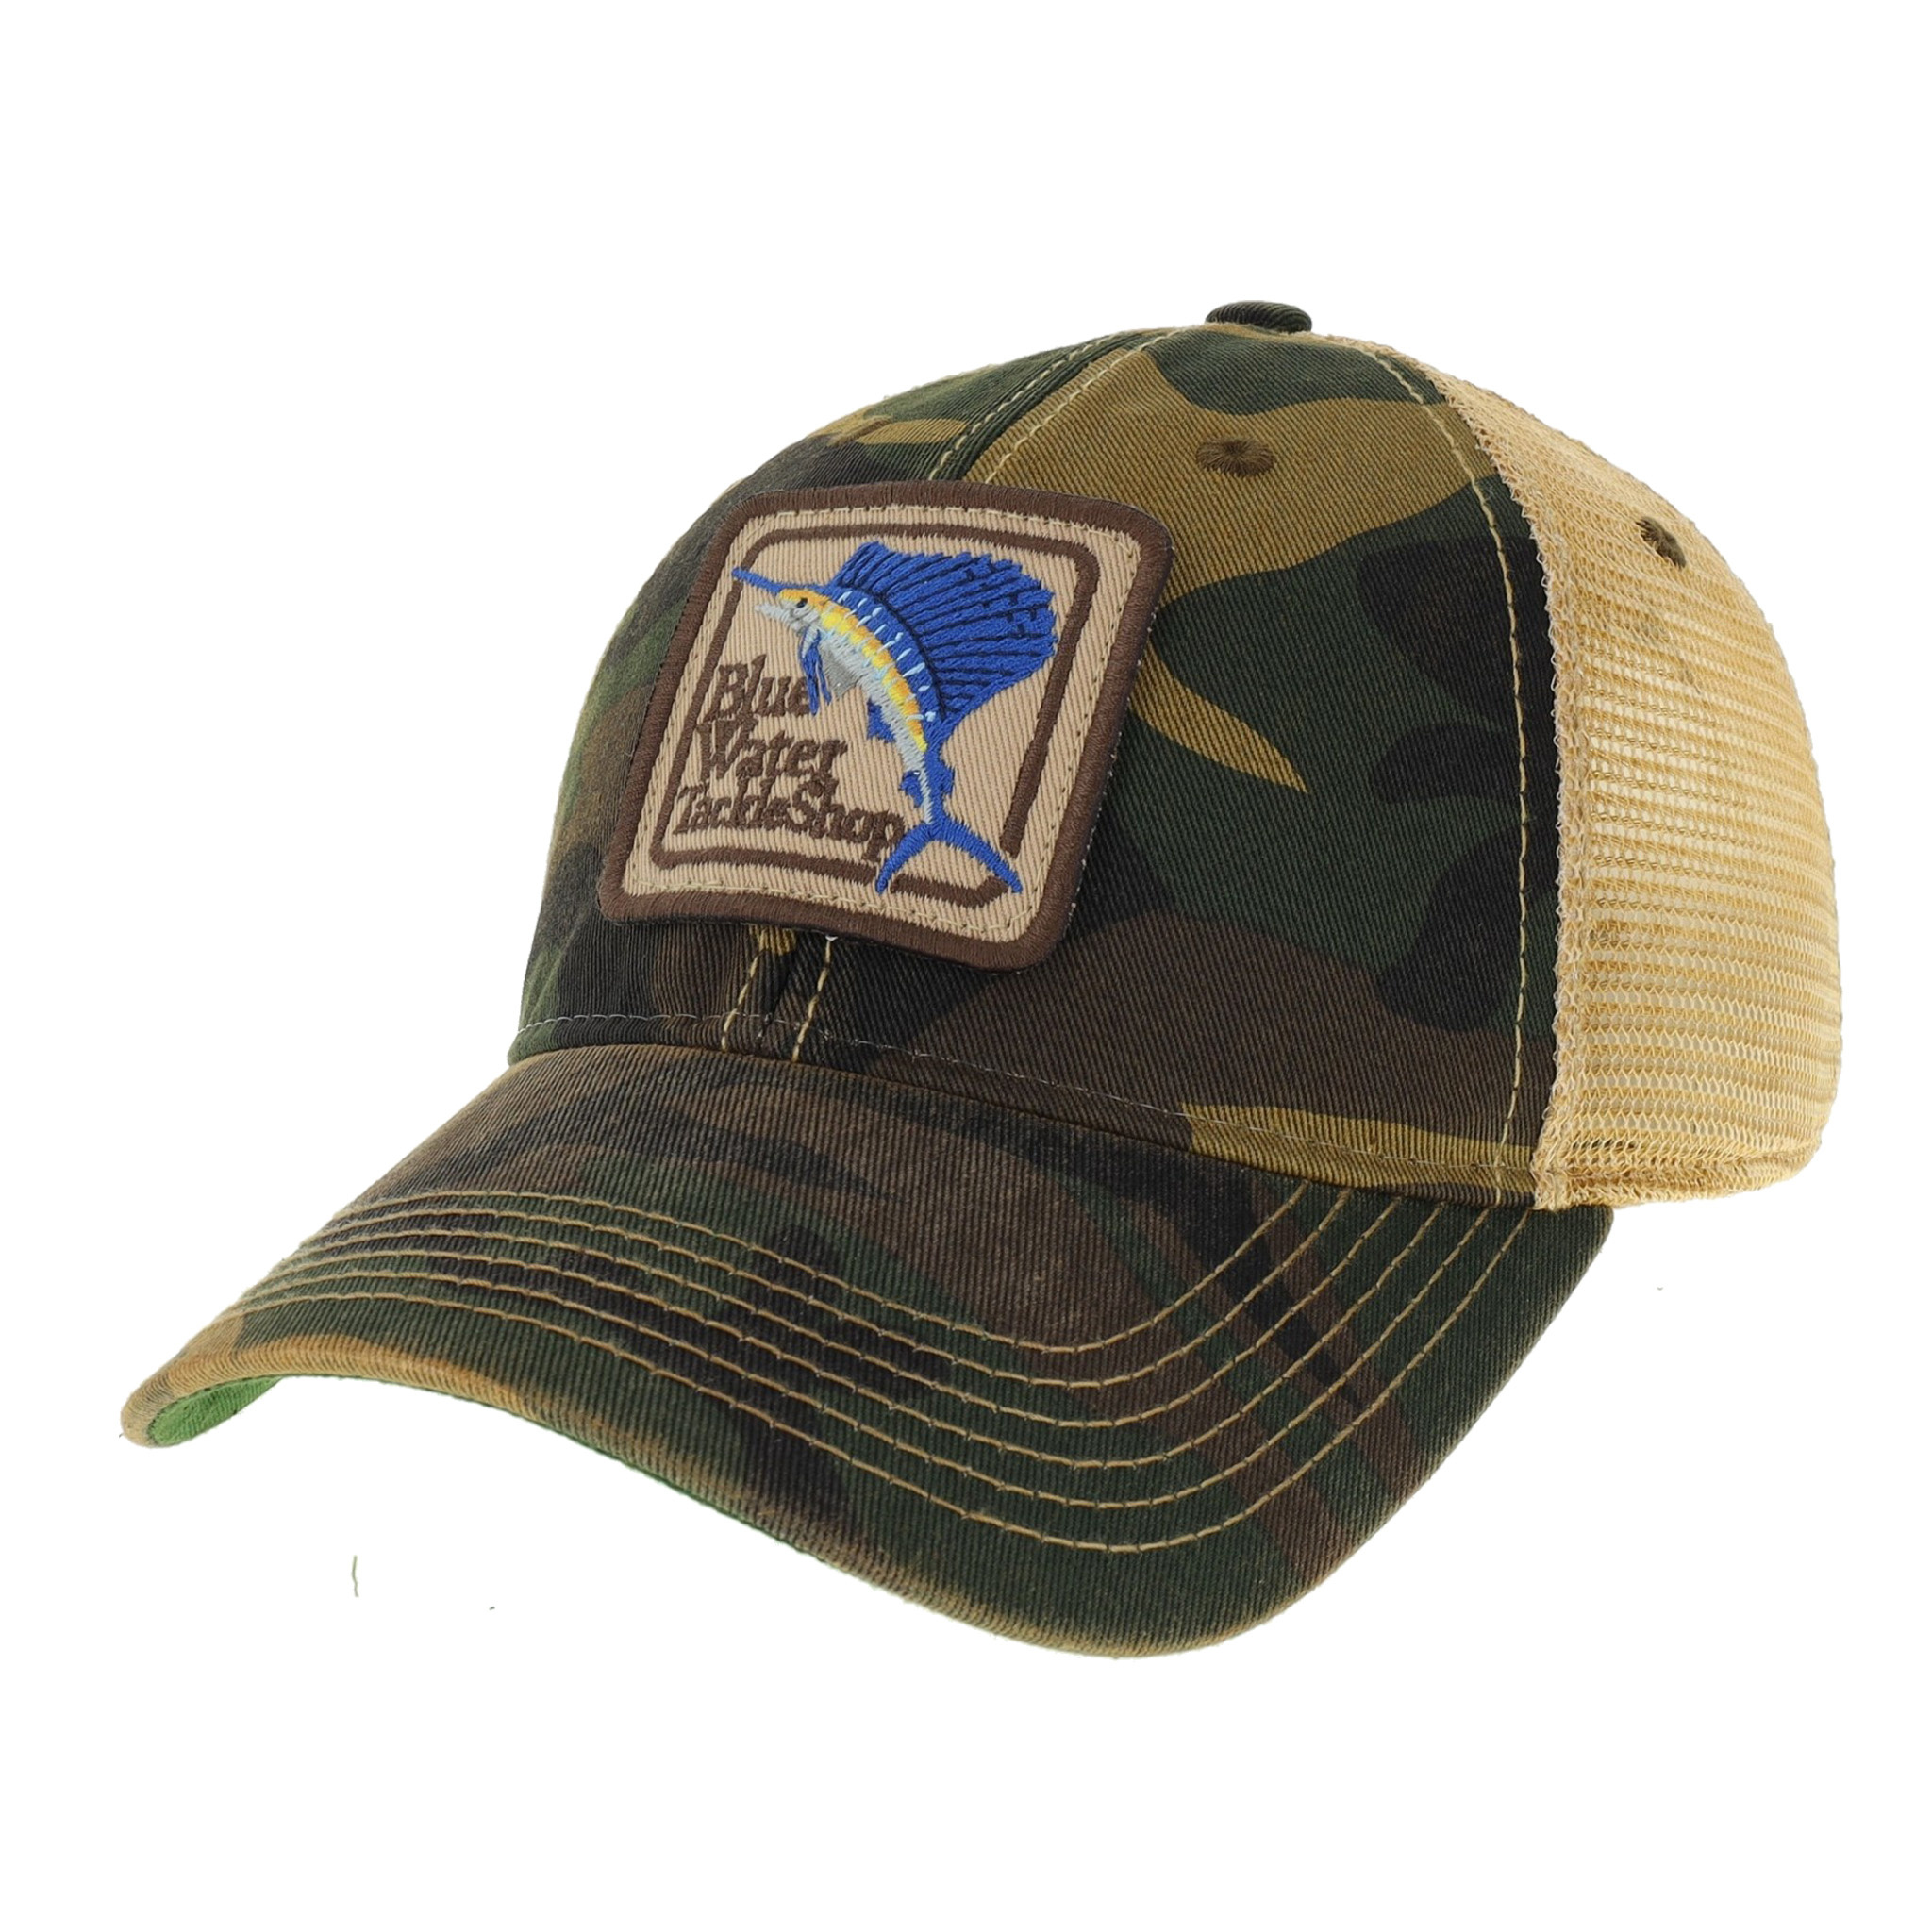 BW Hat - Old Favorite Trucker, Camo, Adult - Salty Dog T-Shirt Factory